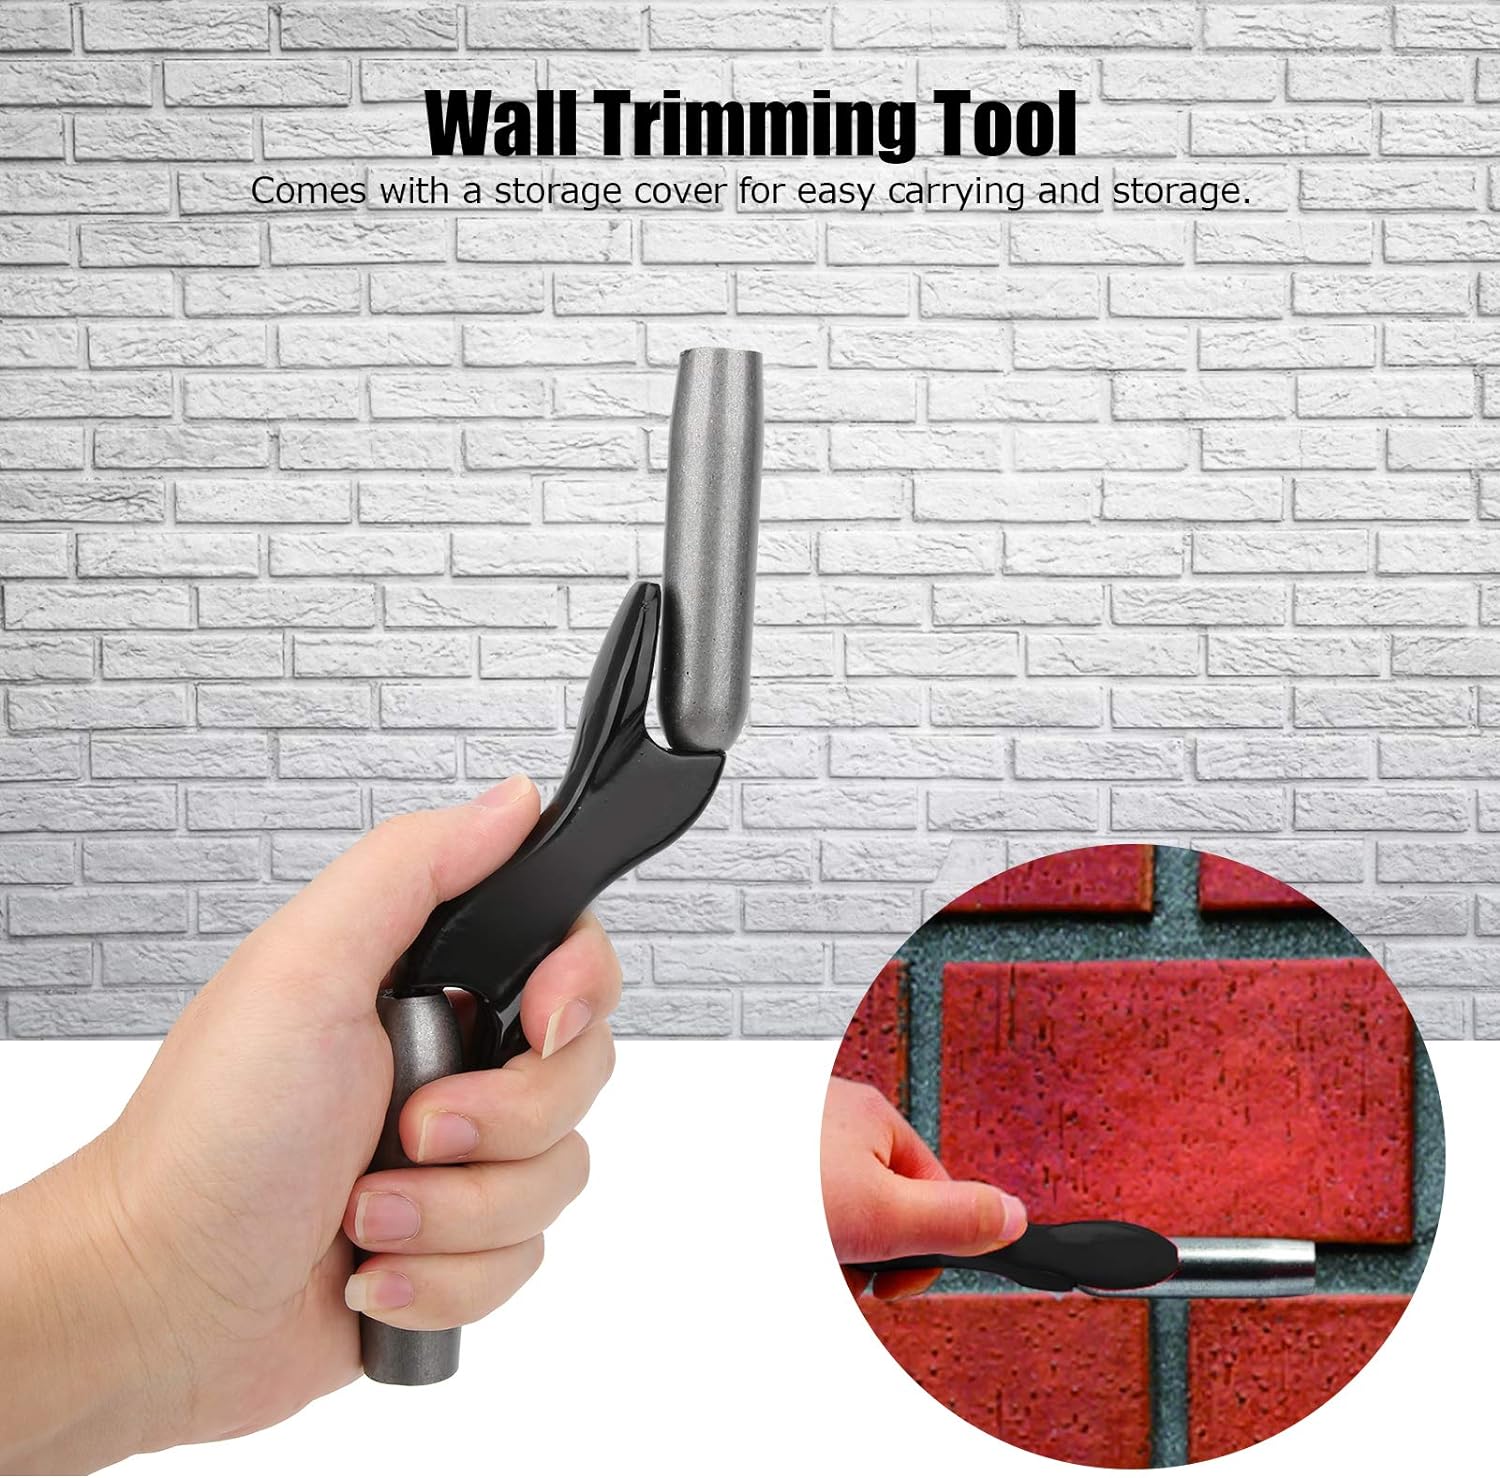 Garosa Brick Jointer, The Premier Line 1/2in 5/8in 3/4in 7/8in Brick Jointer, Handheld Builder Trimming Tool Wall Beauty Stitcher